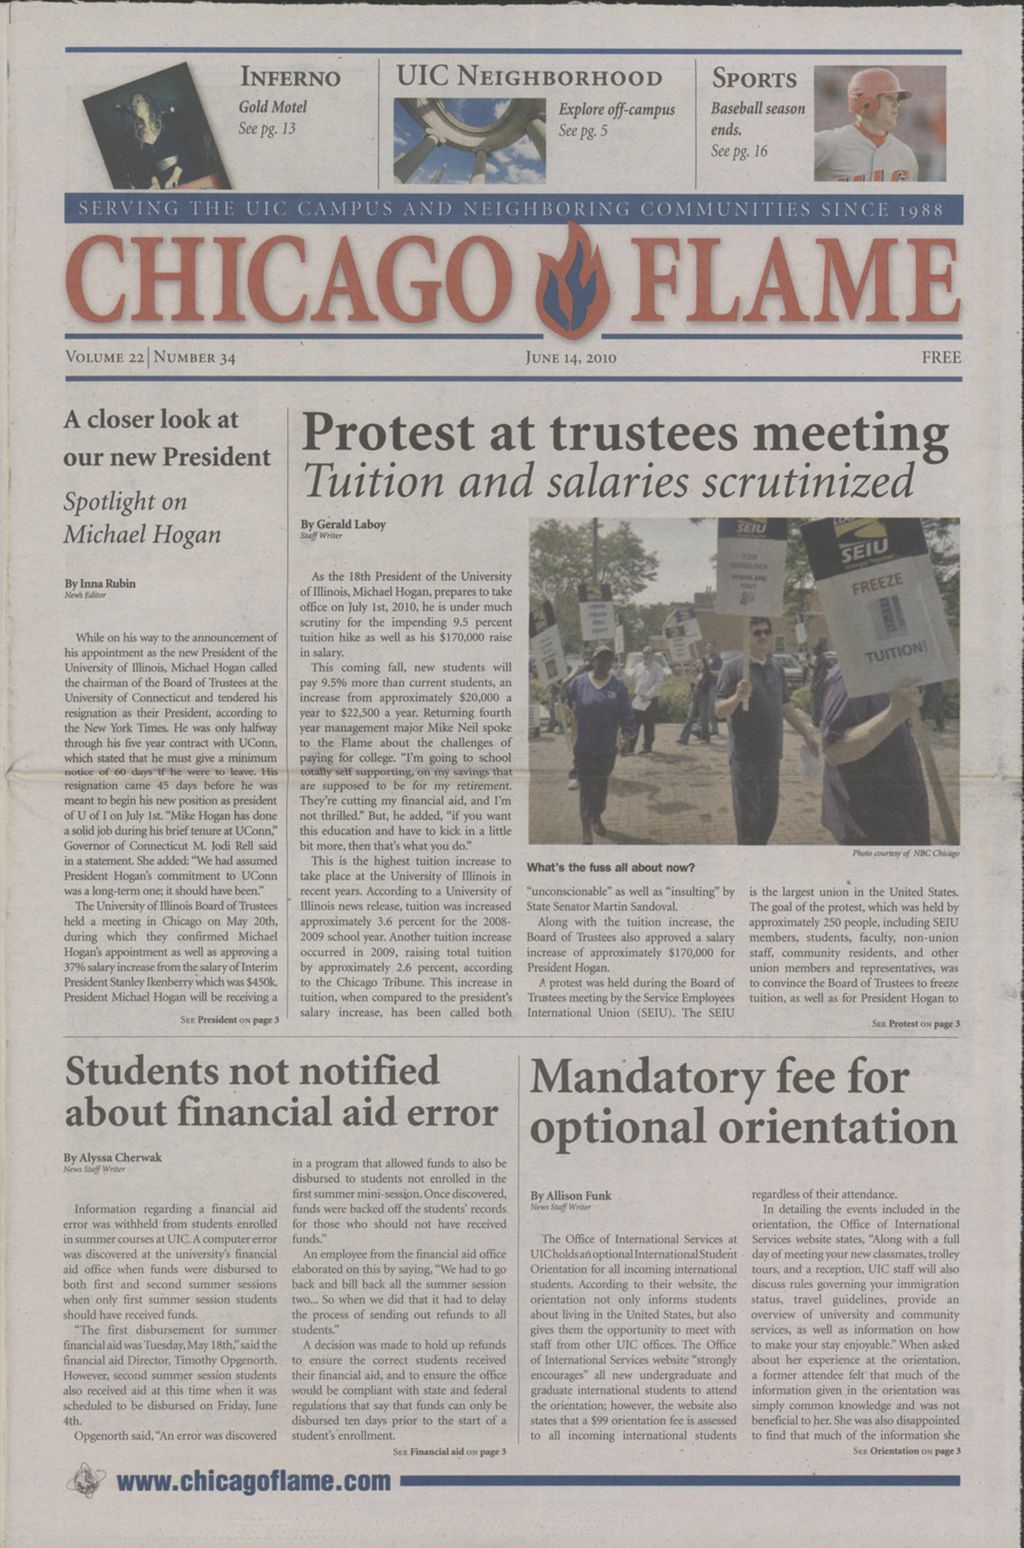 Miniature of Chicago Flame (June 14, 2010)